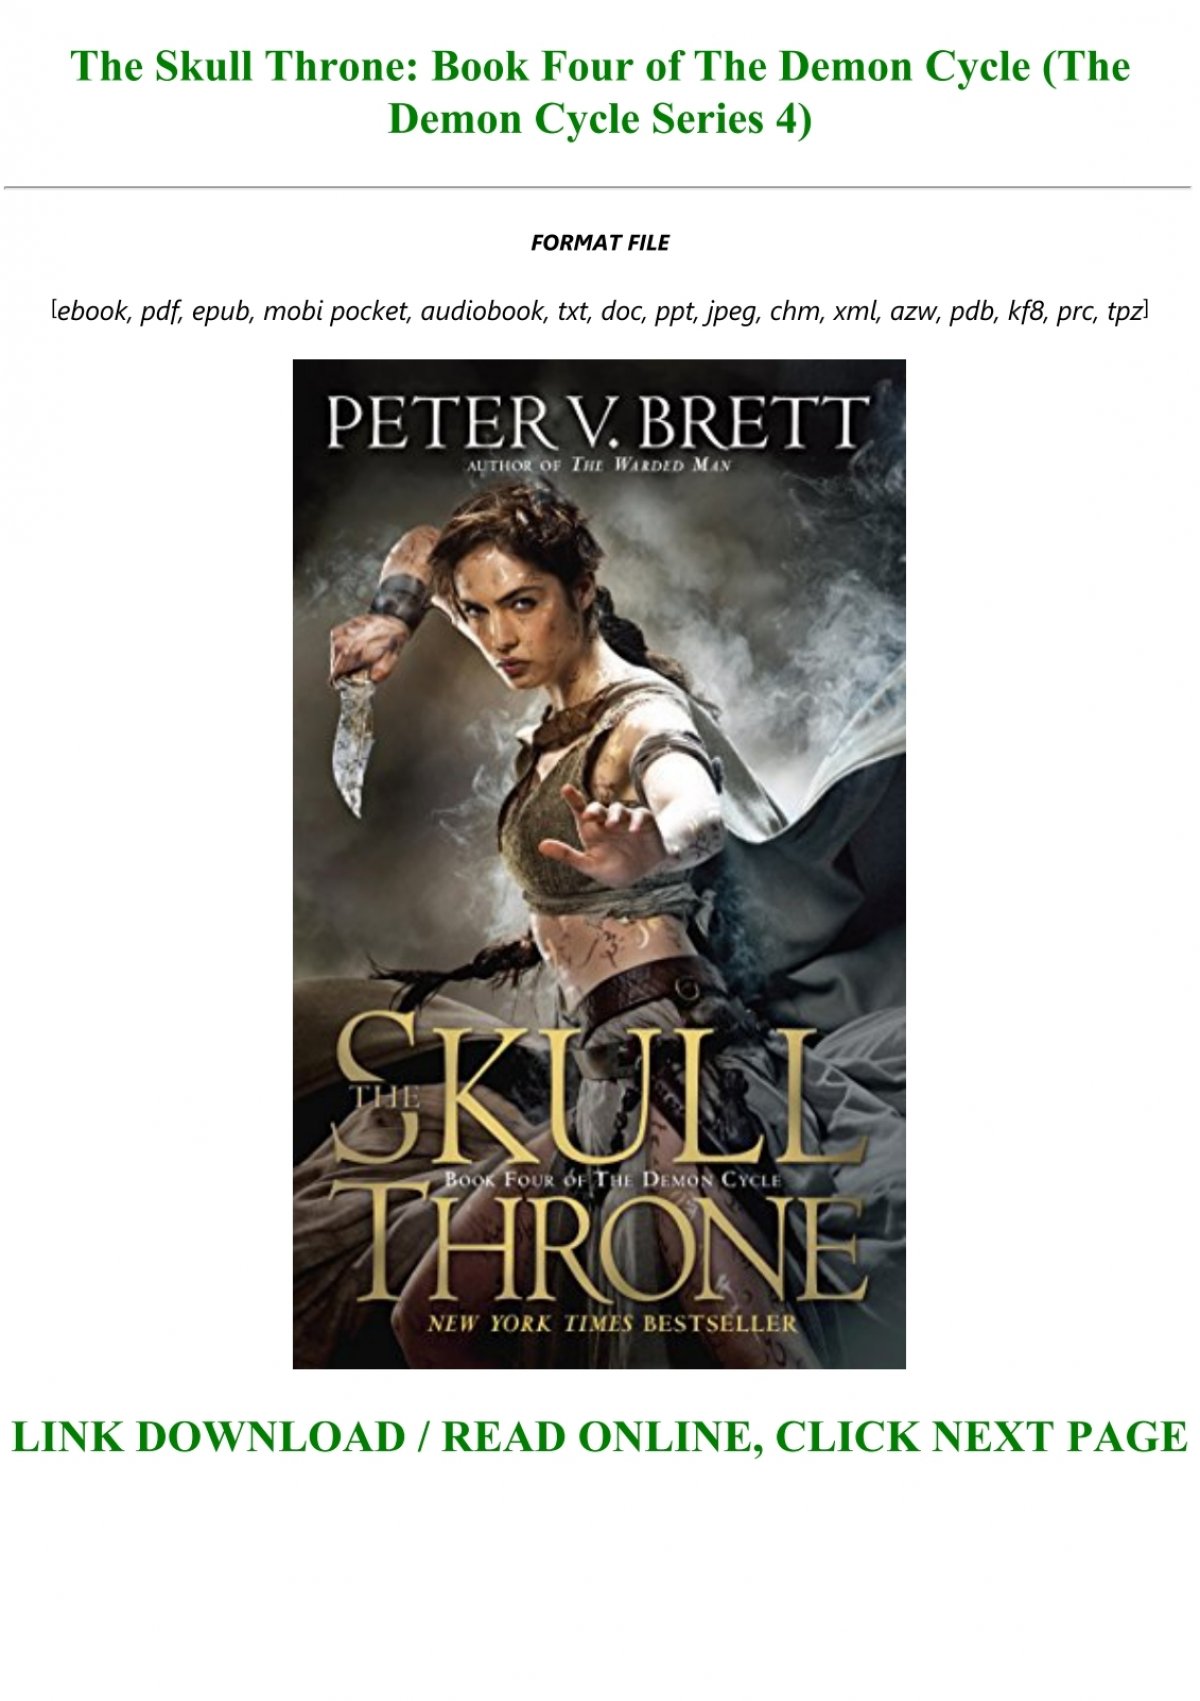 The Skull Throne Pdf Download